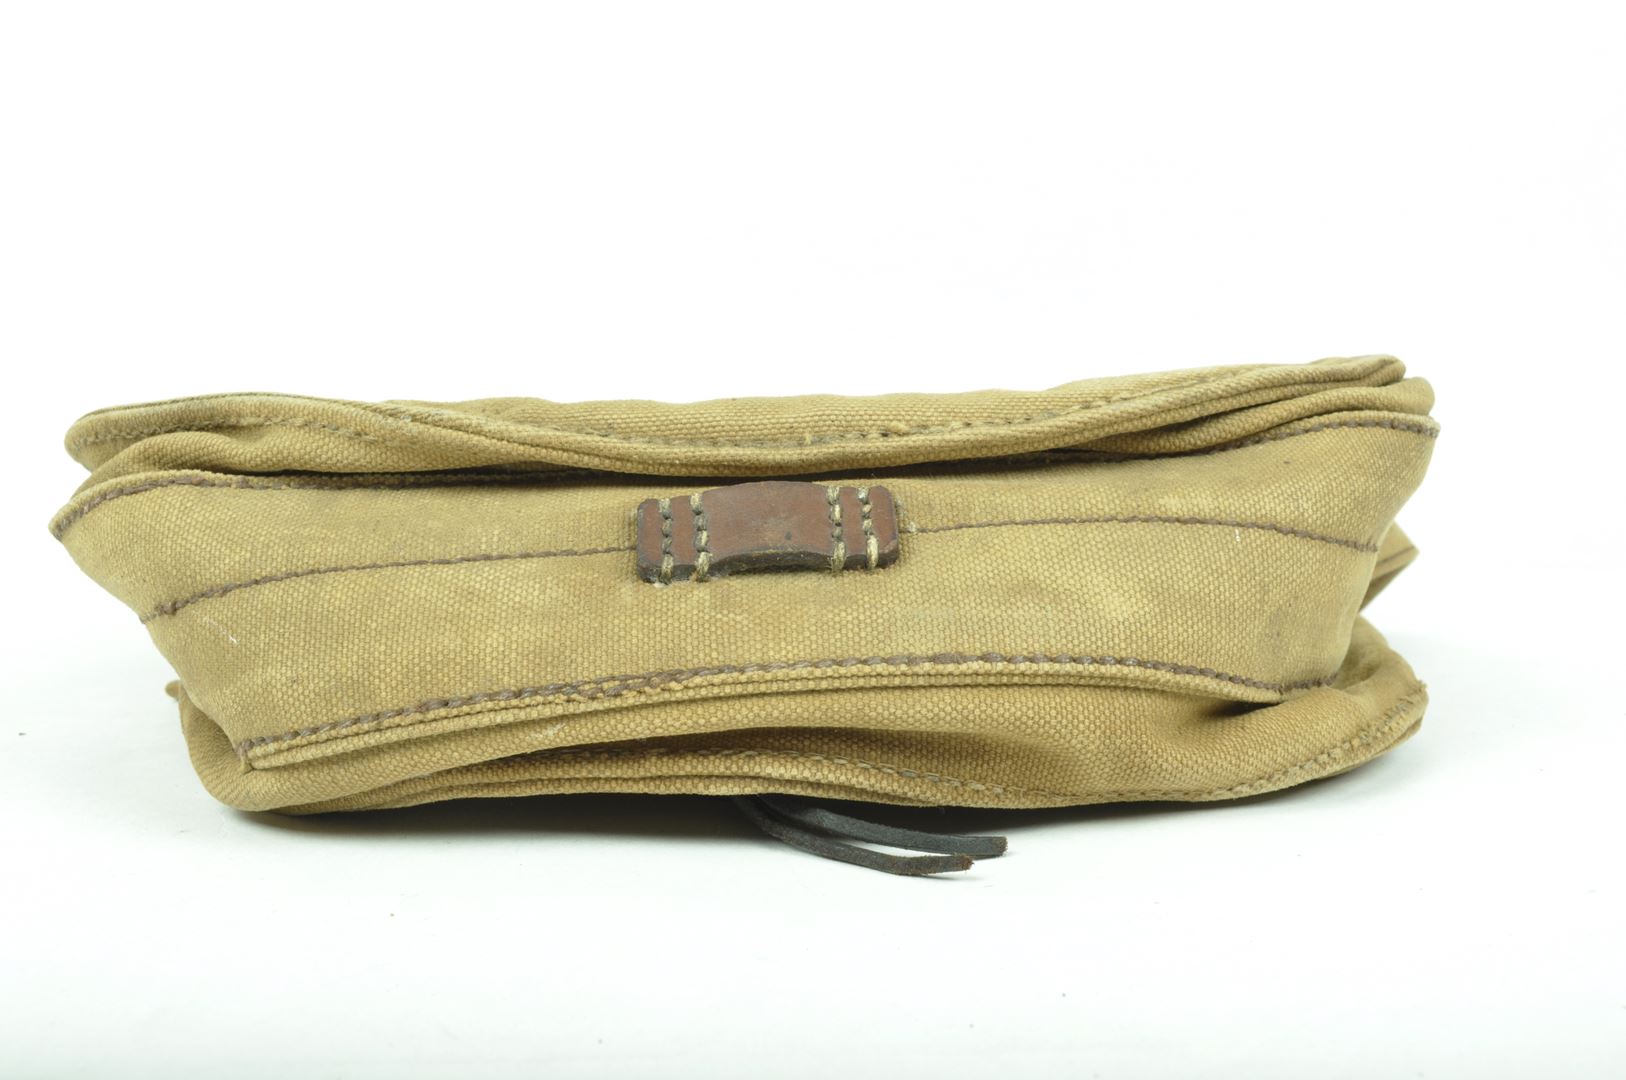 Musette porte chargeurs Chauchat